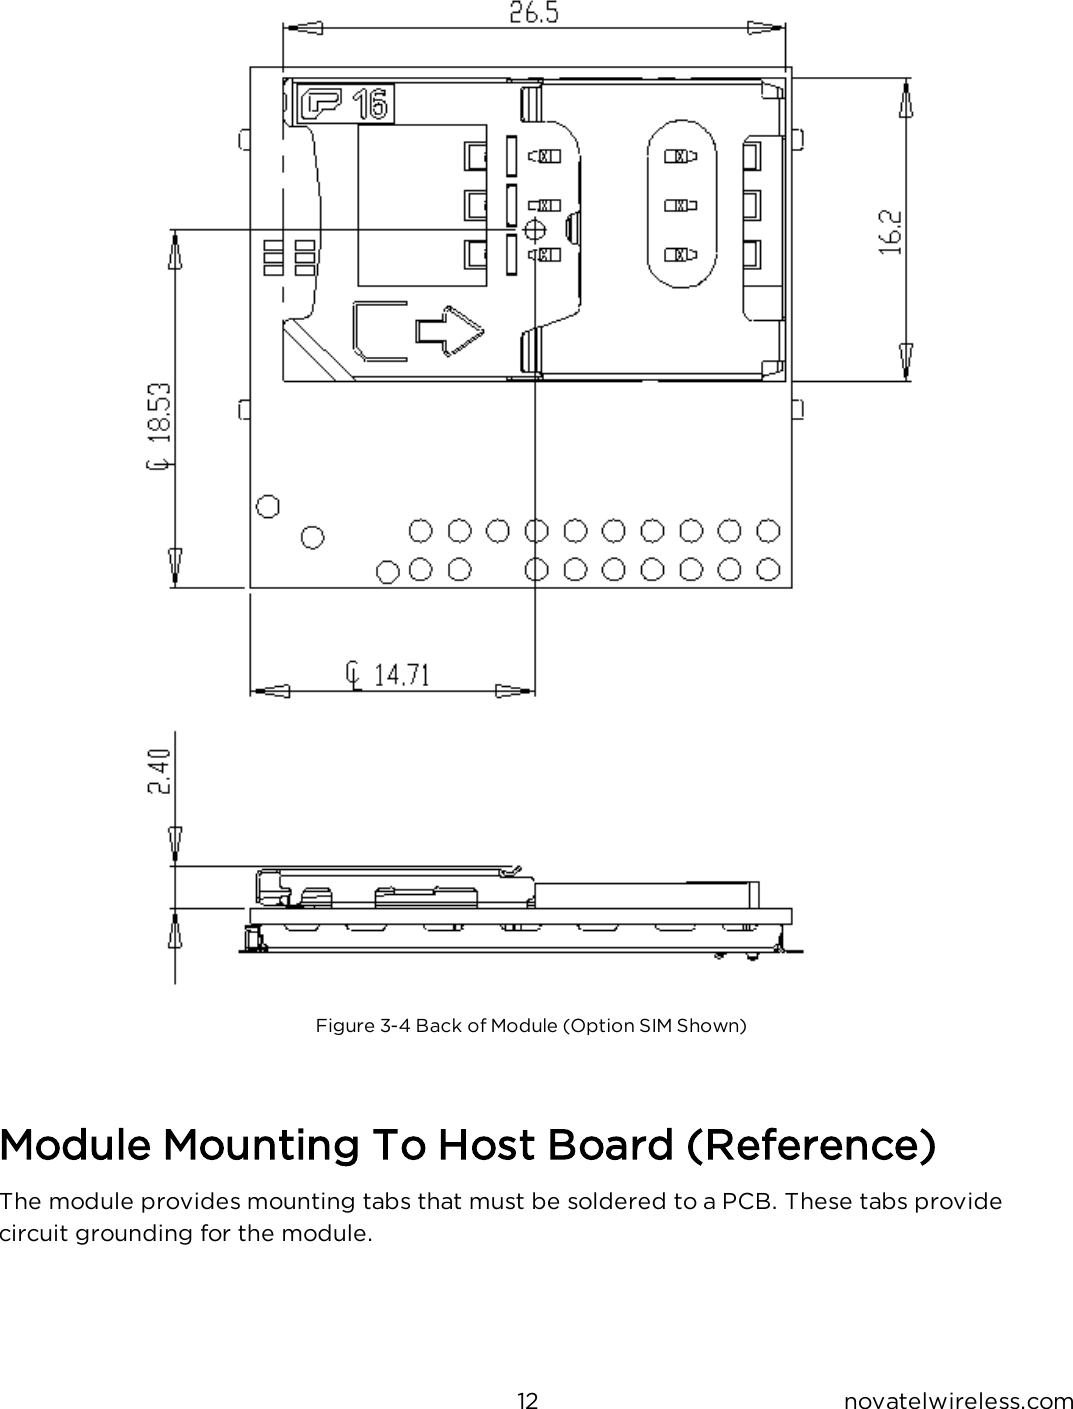 12 novatelwireless.comFigure 3-4 Back of Module (Option SIM Shown)Module Mounting To Host Board (Reference)The module provides mounting tabs that must be soldered to a PCB.  These tabs provide circuit grounding for the module.